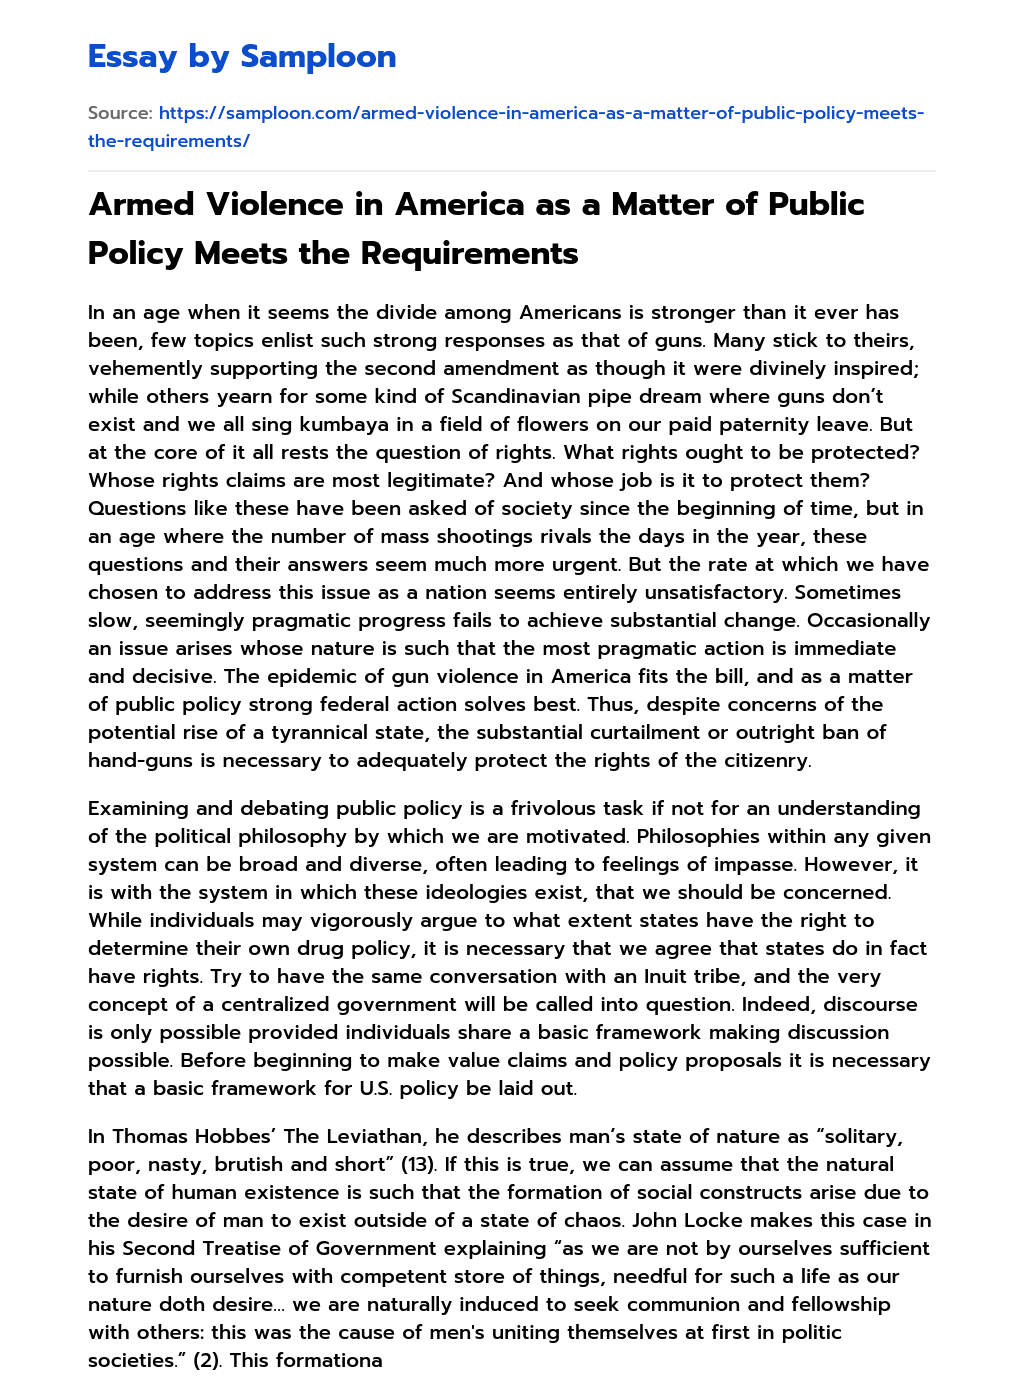 Armed Violence in America as a Matter of Public Policy Meets the Requirements essay